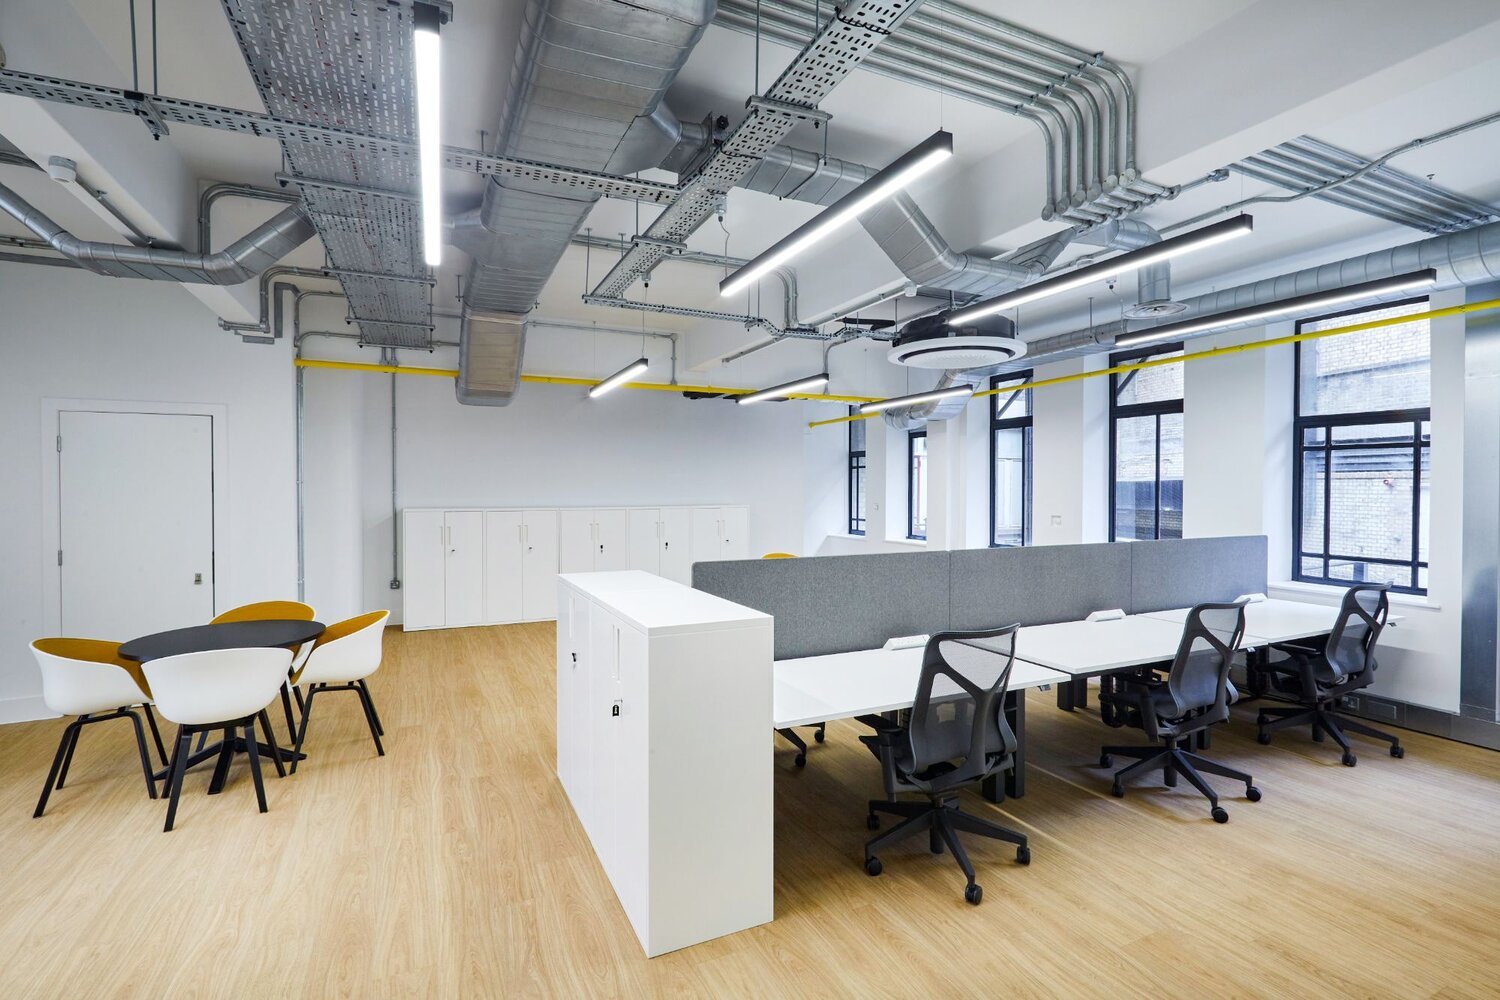 Office lighting for a high-end plug and play office space at 20 Dering Street, London.